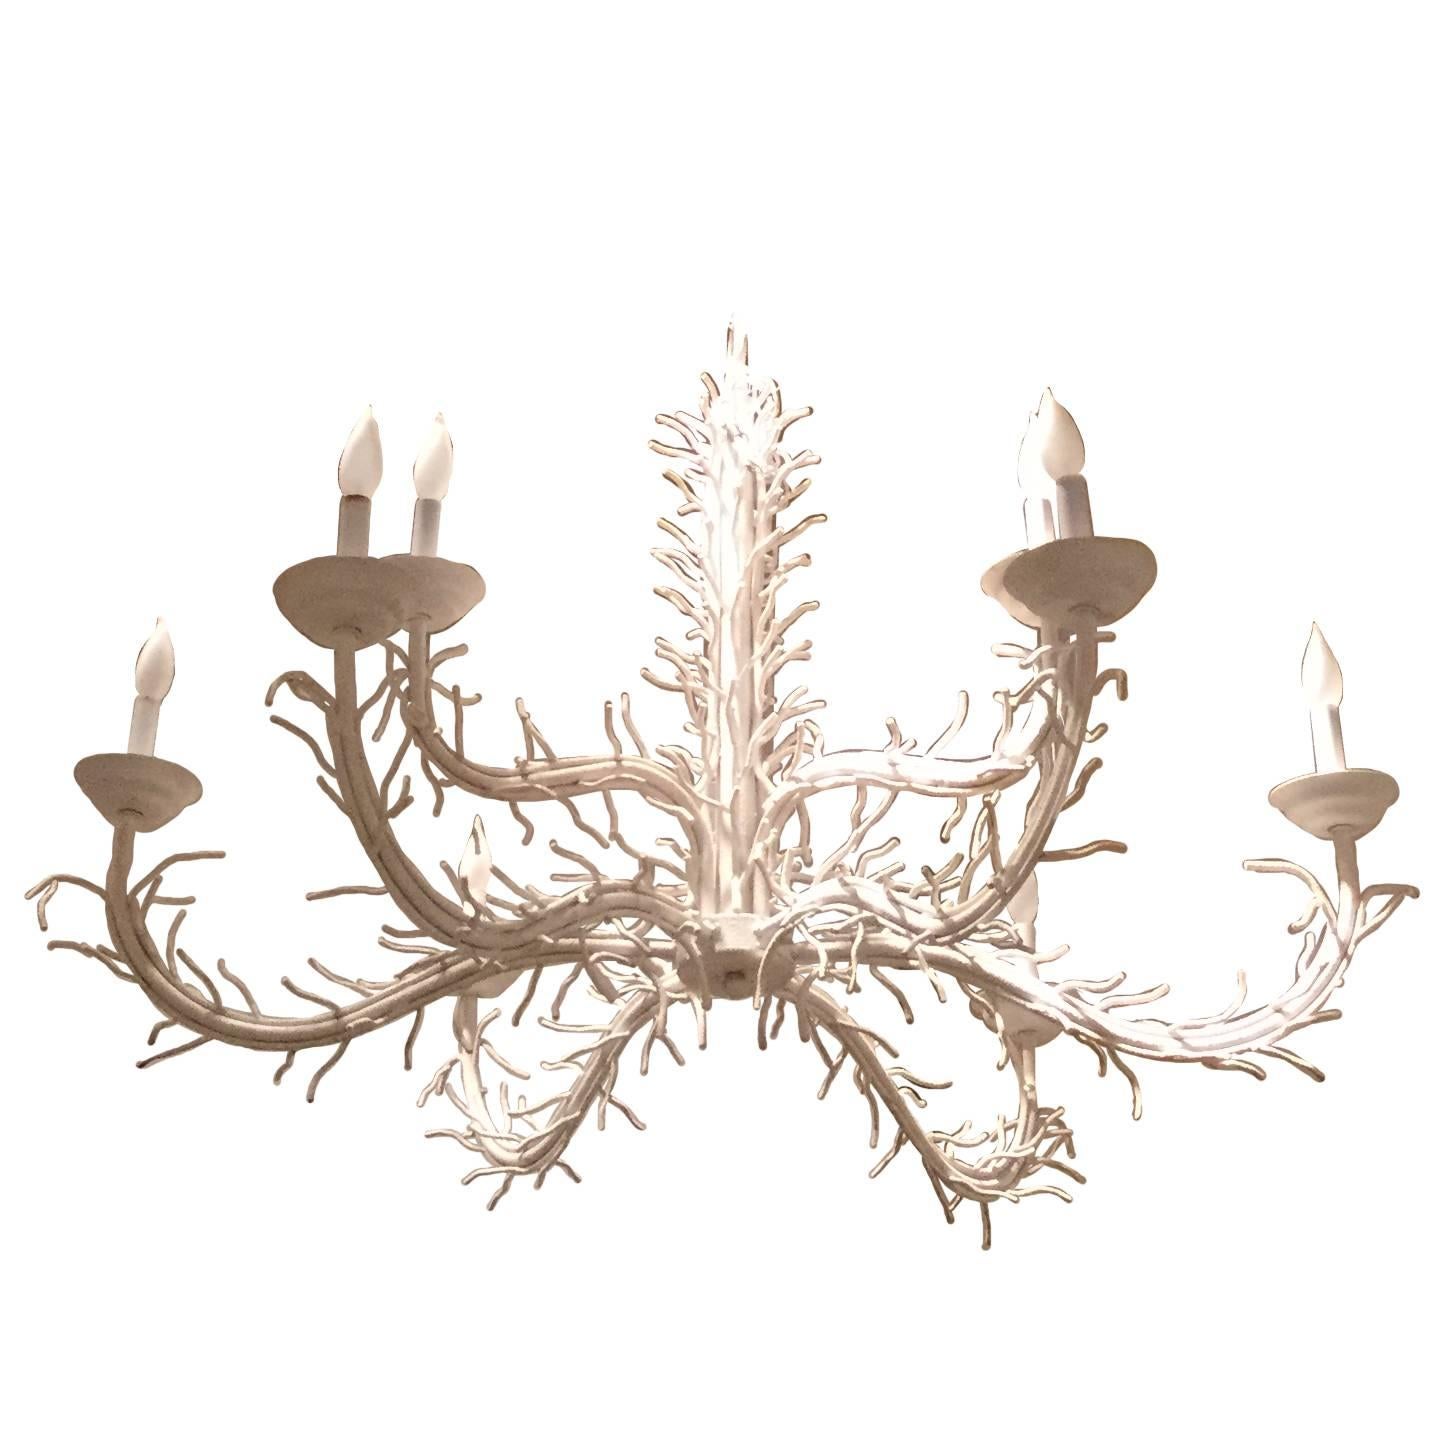 Extra large iron coral chandelier with nine-lights. This versatile Hollywood Regency chandelier would be fabulous in a coastal home, garden room, dining room or bedroom. It would also look great sprayed in a coral color.

 
 